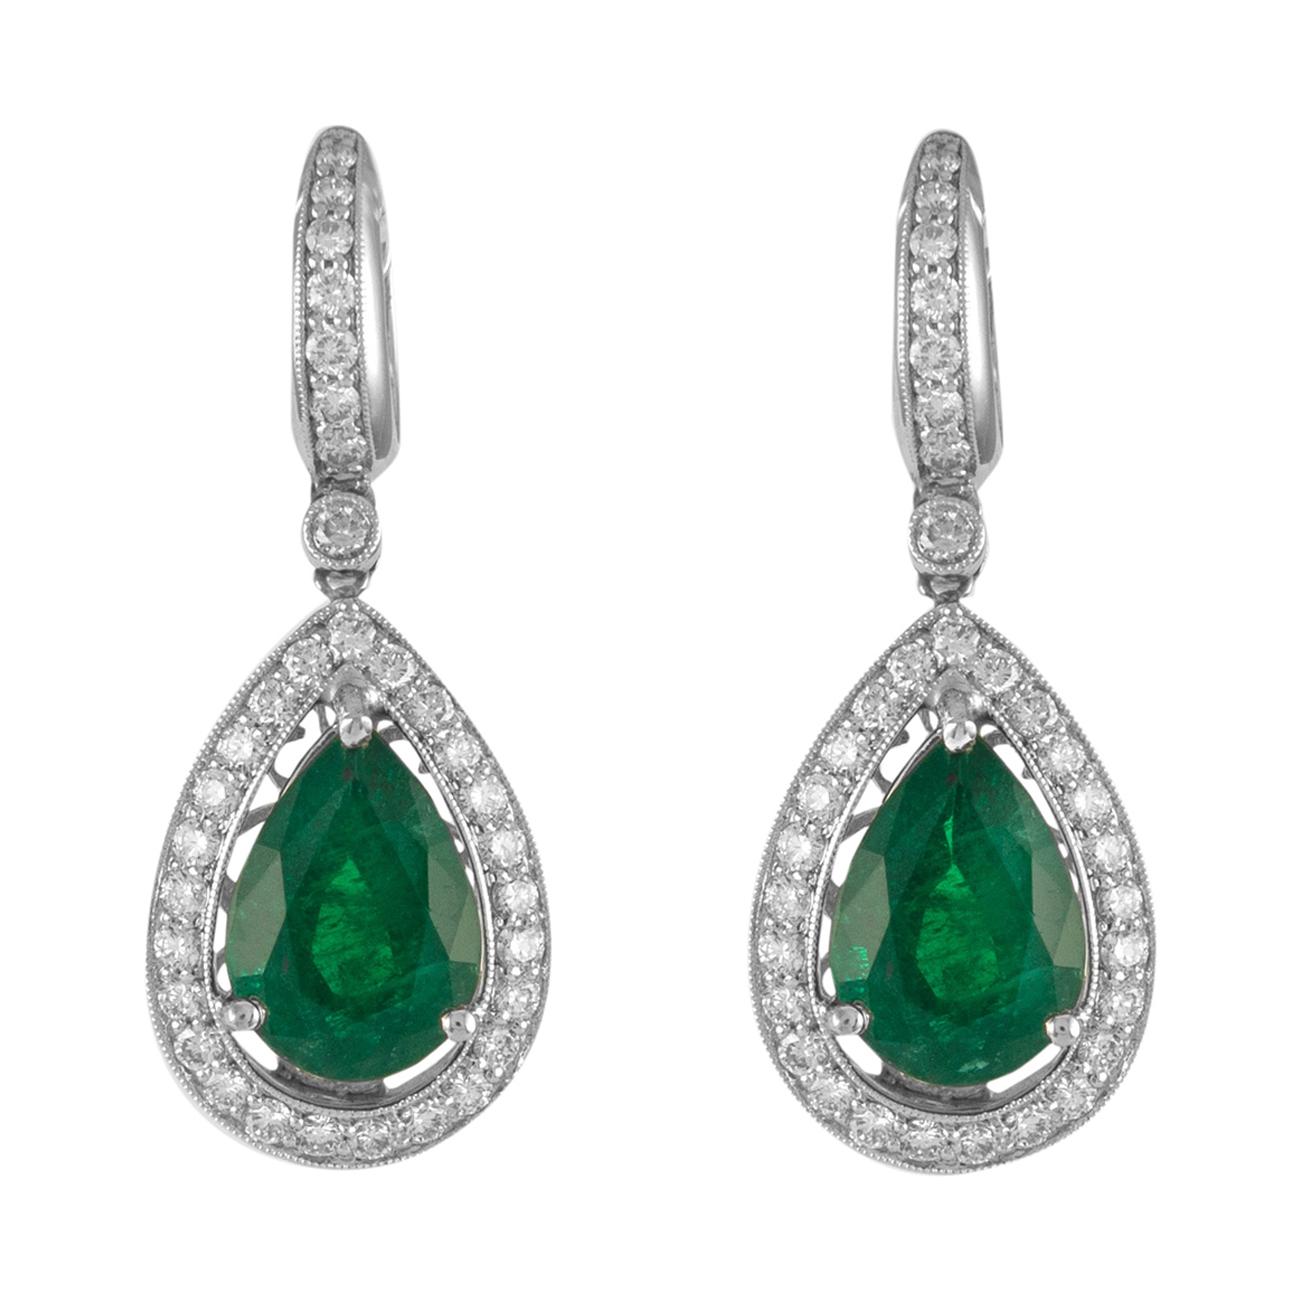 8.69ct Pear Emeralds with Diamonds Drop Earrings 18k White Gold